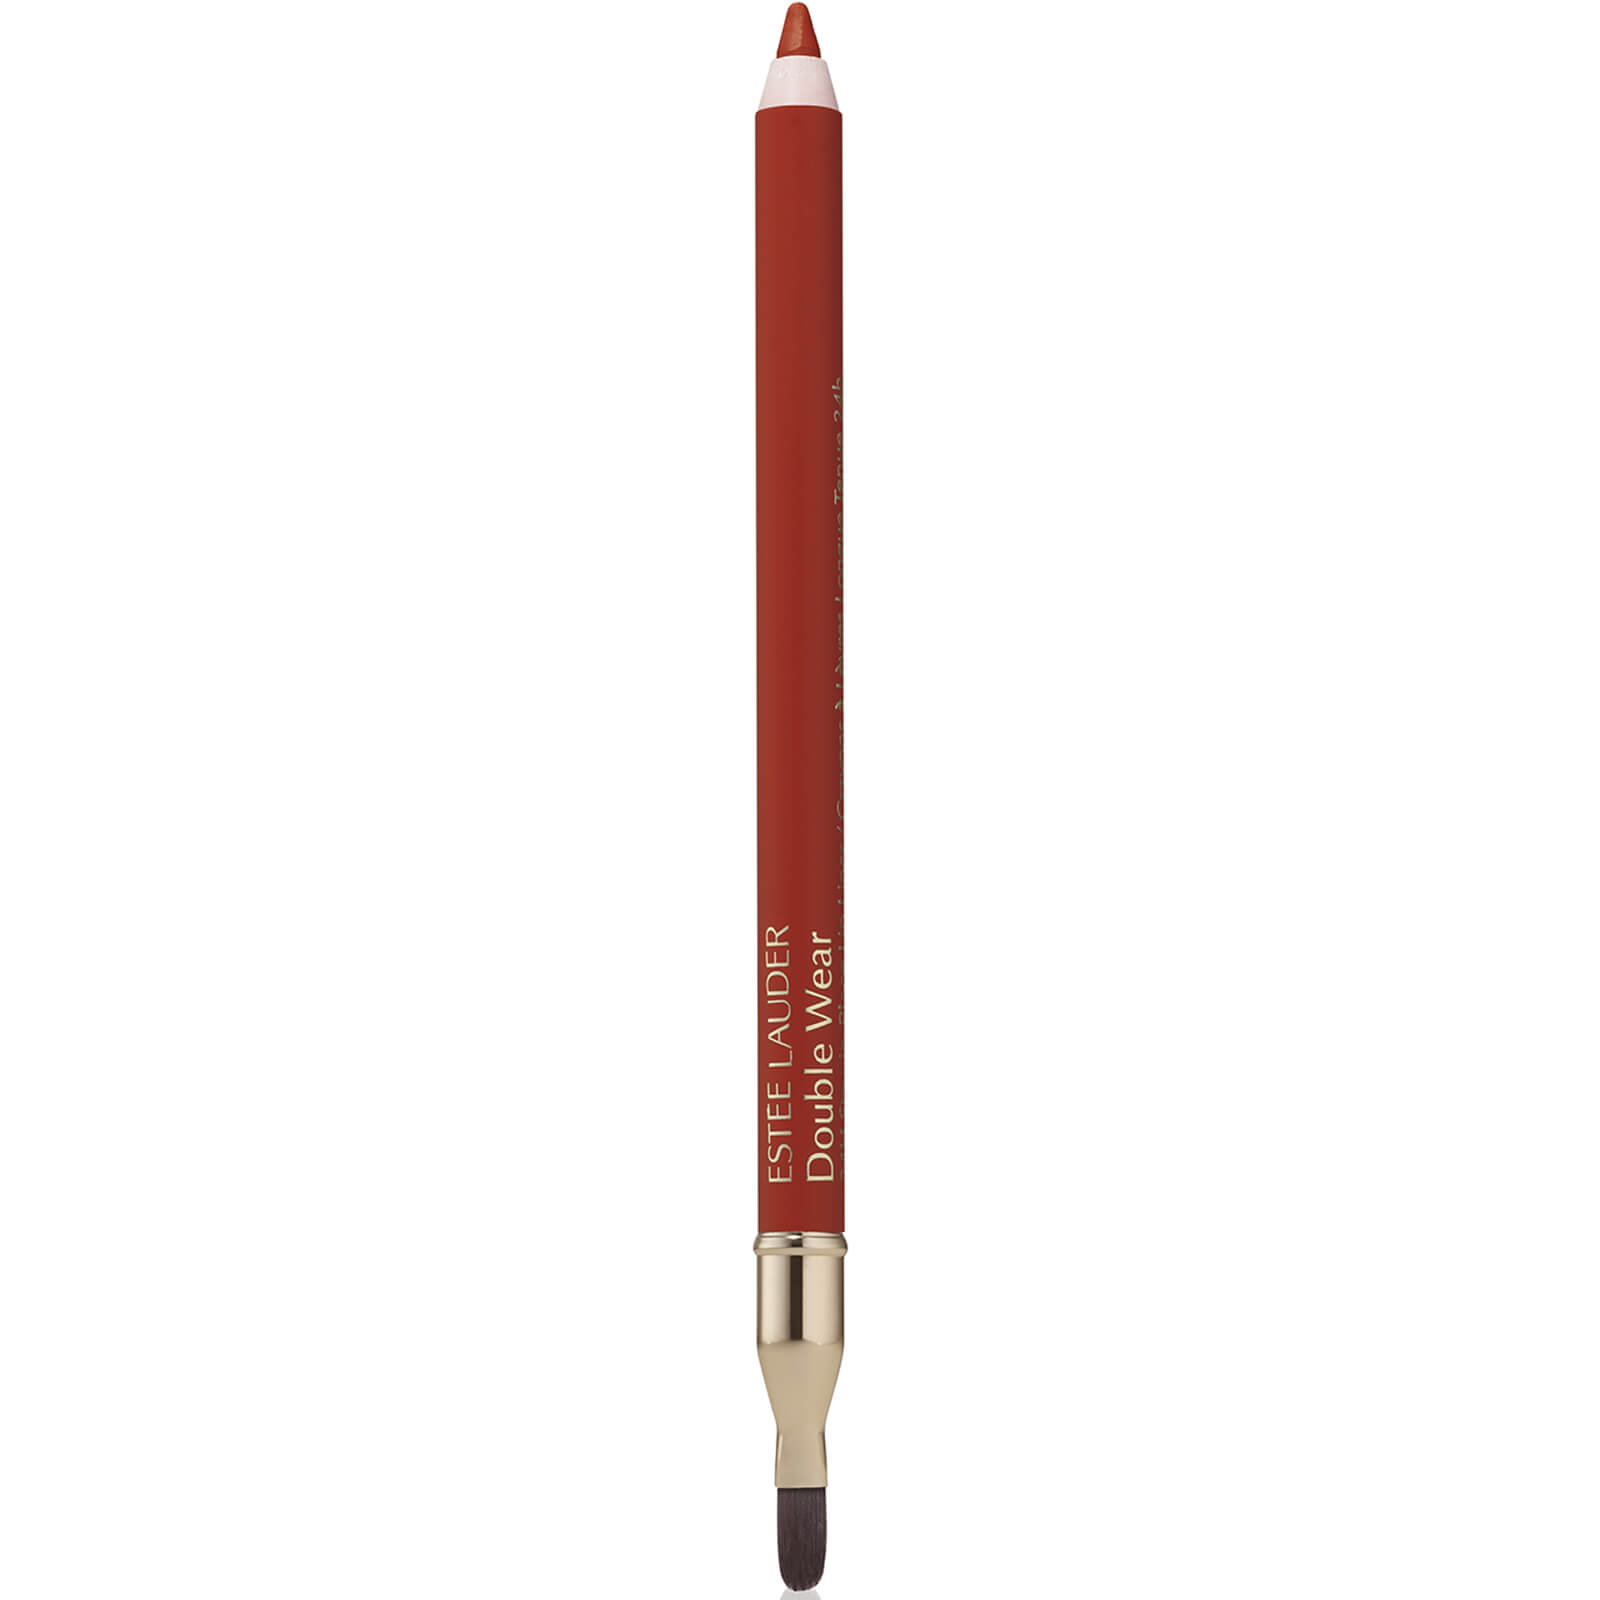 Estee Lauder Double Wear 24H Stay-in-Place Lip Liner 1.2g (Various Shades) - Persuasive